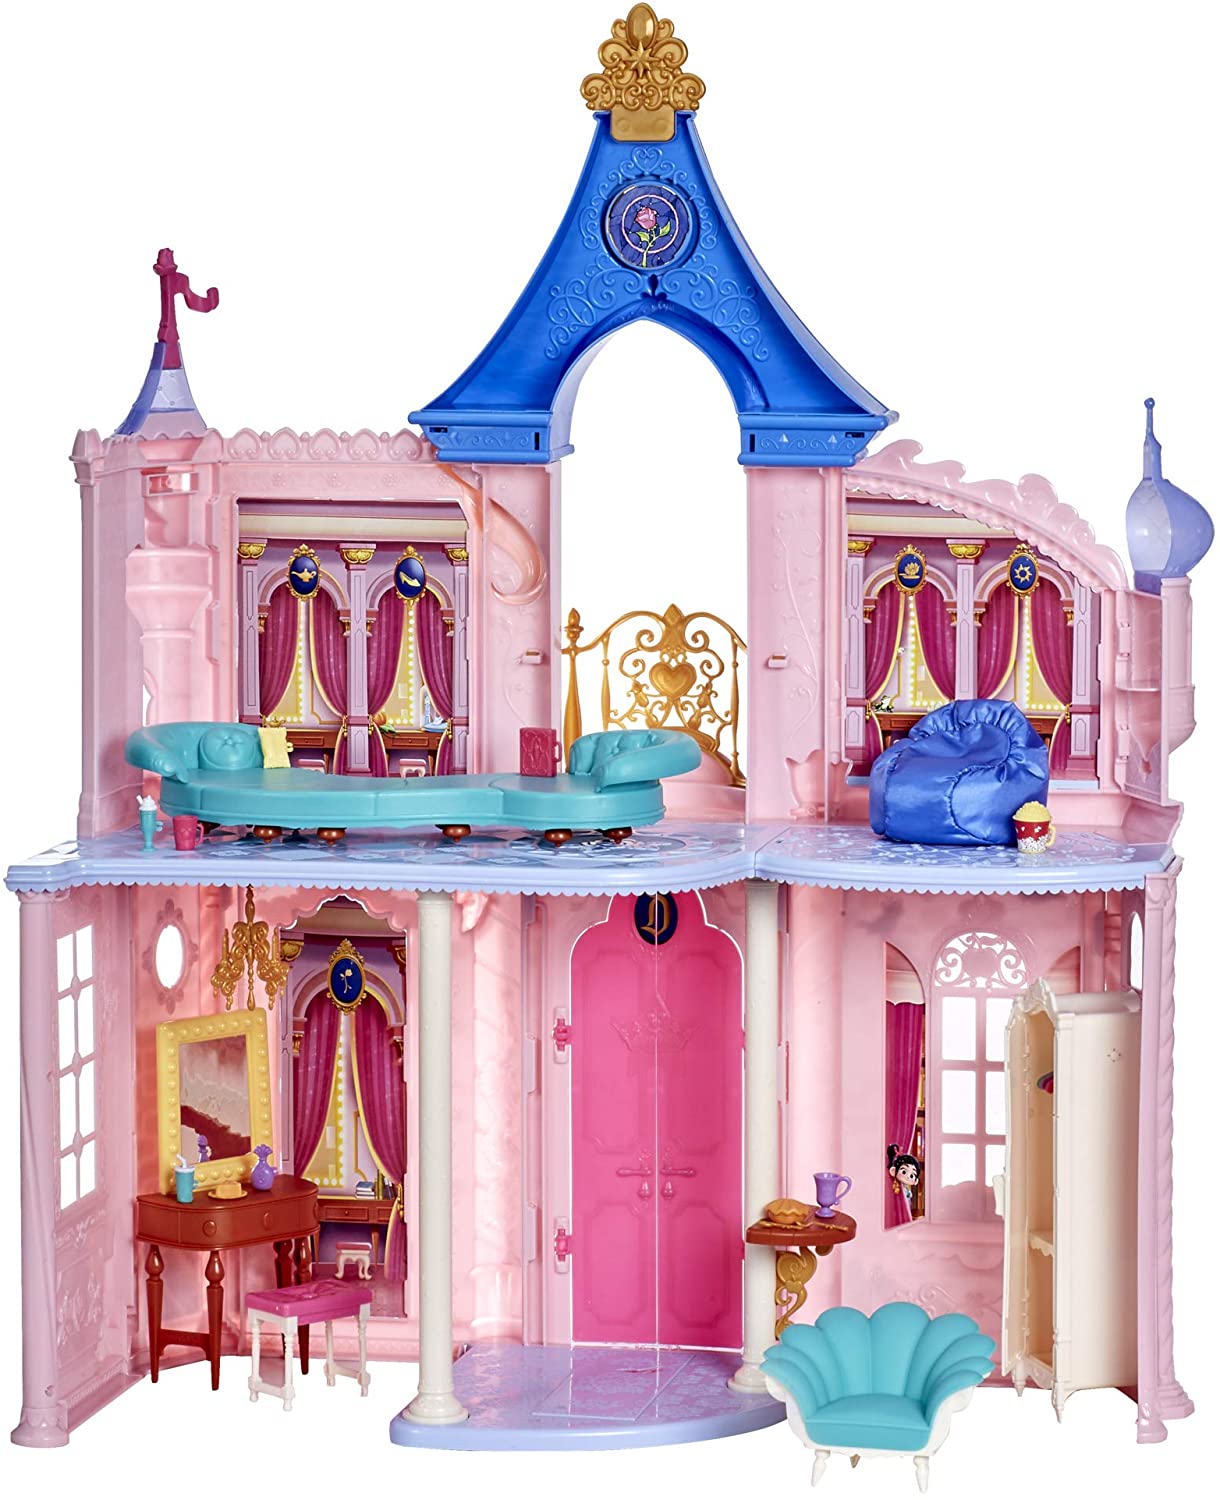 3.5' Disney Princess Fashion Doll Castle w/ 16 Accessories & 6 Pieces of Furniture $49 + Free Shipping